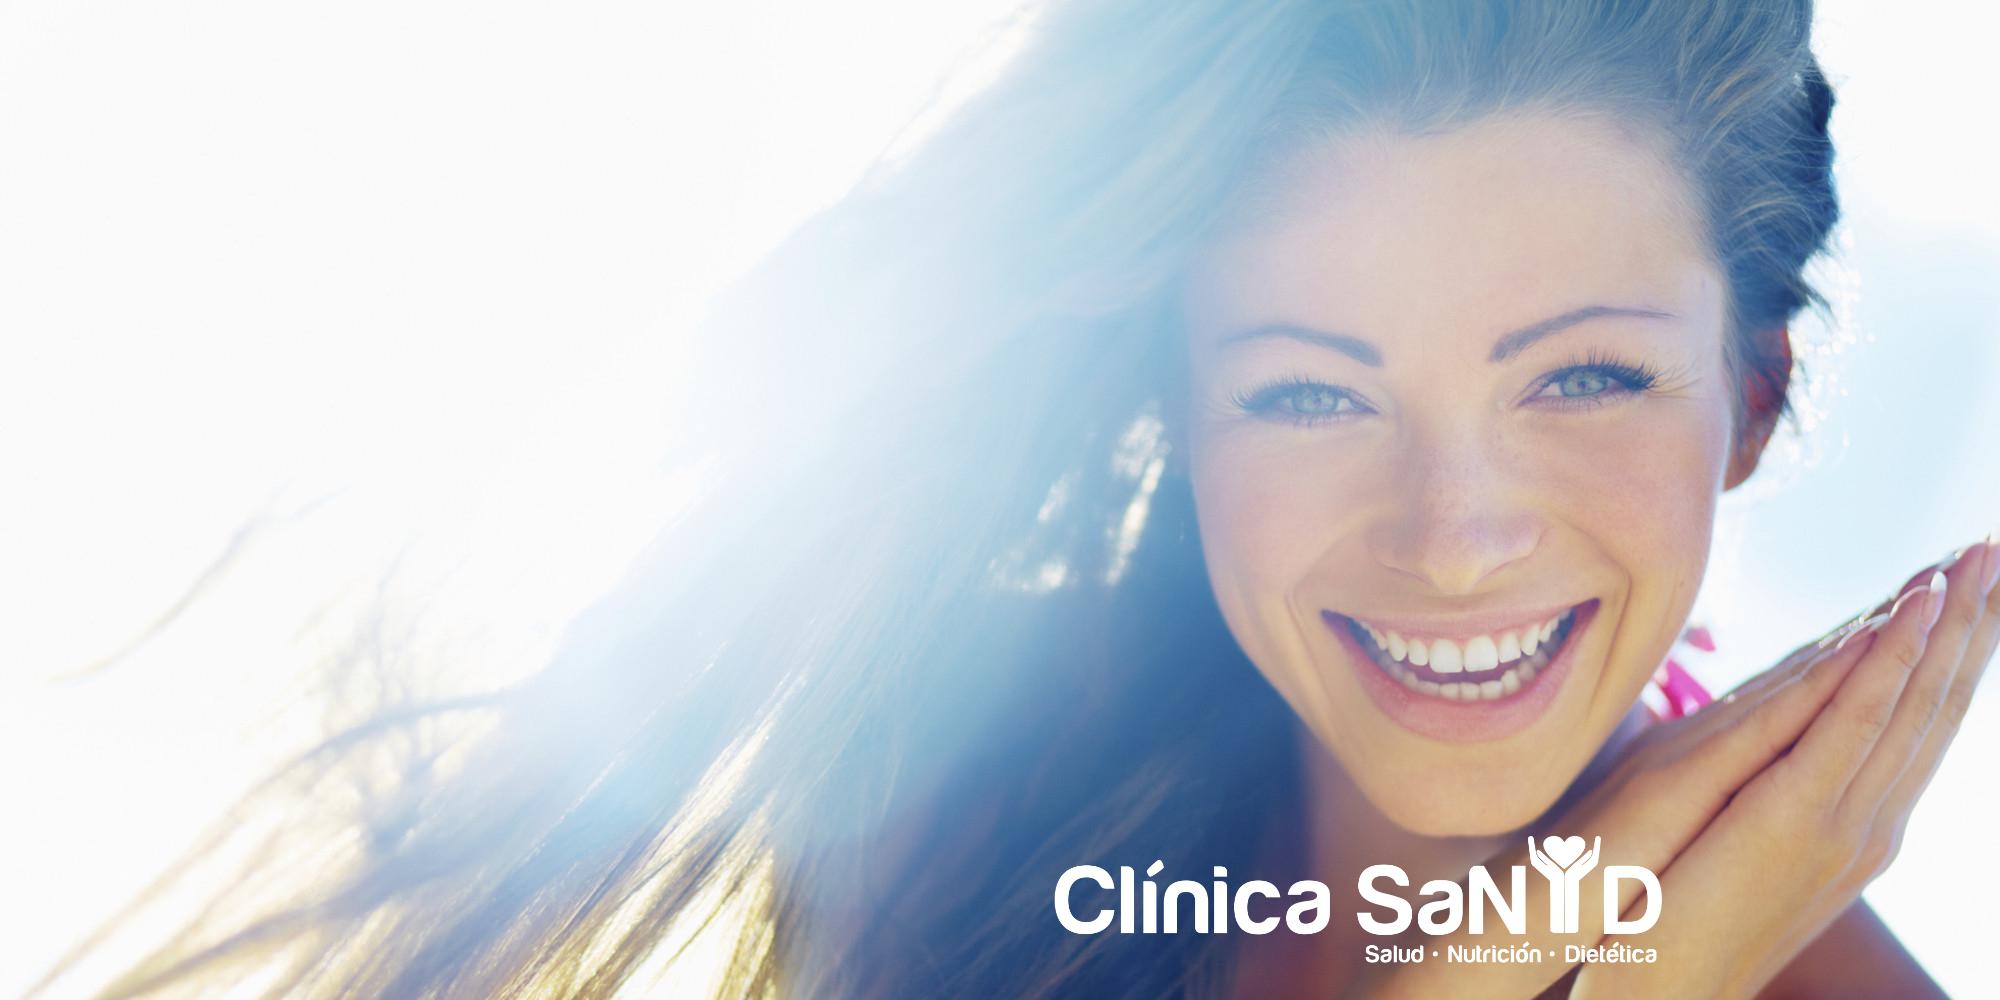 Images Clinicas Sanyd